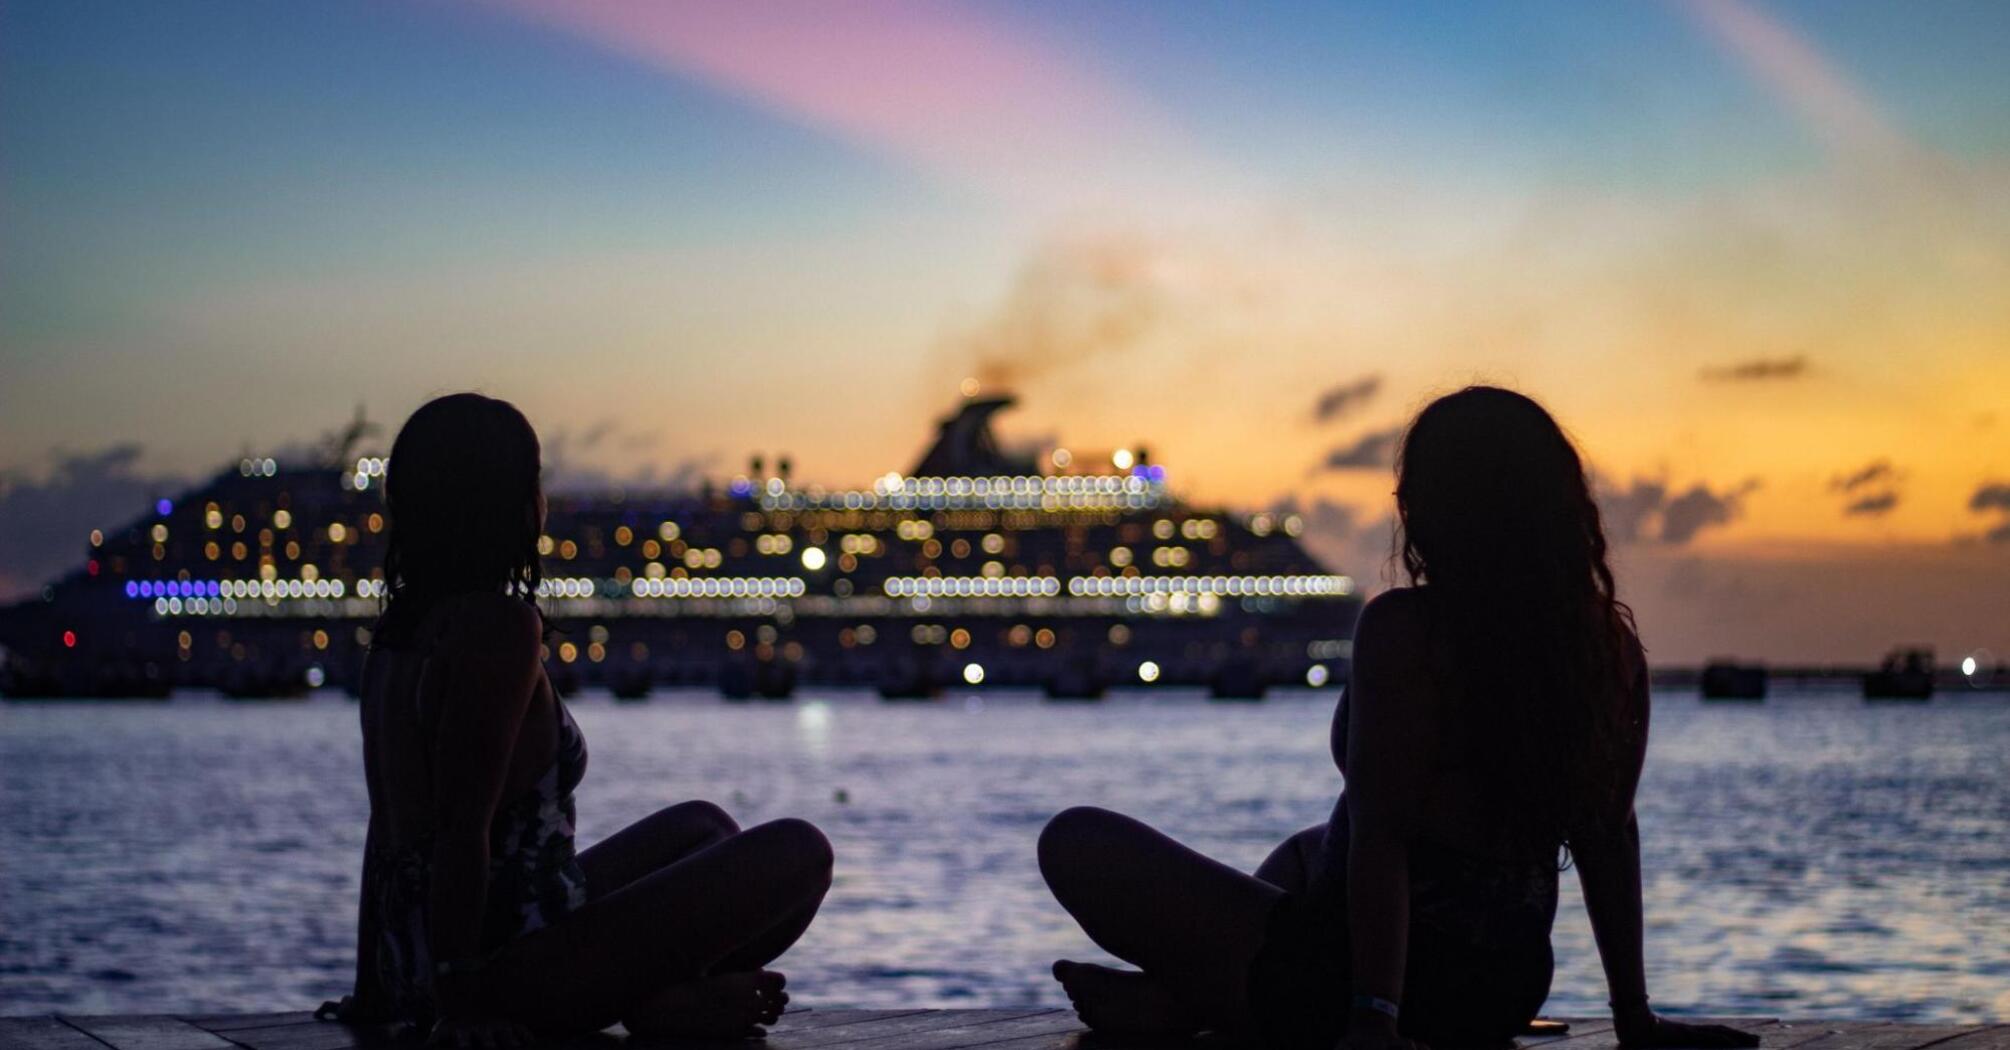 Two girls on the ocean shore against the backdrop of a cruise ship